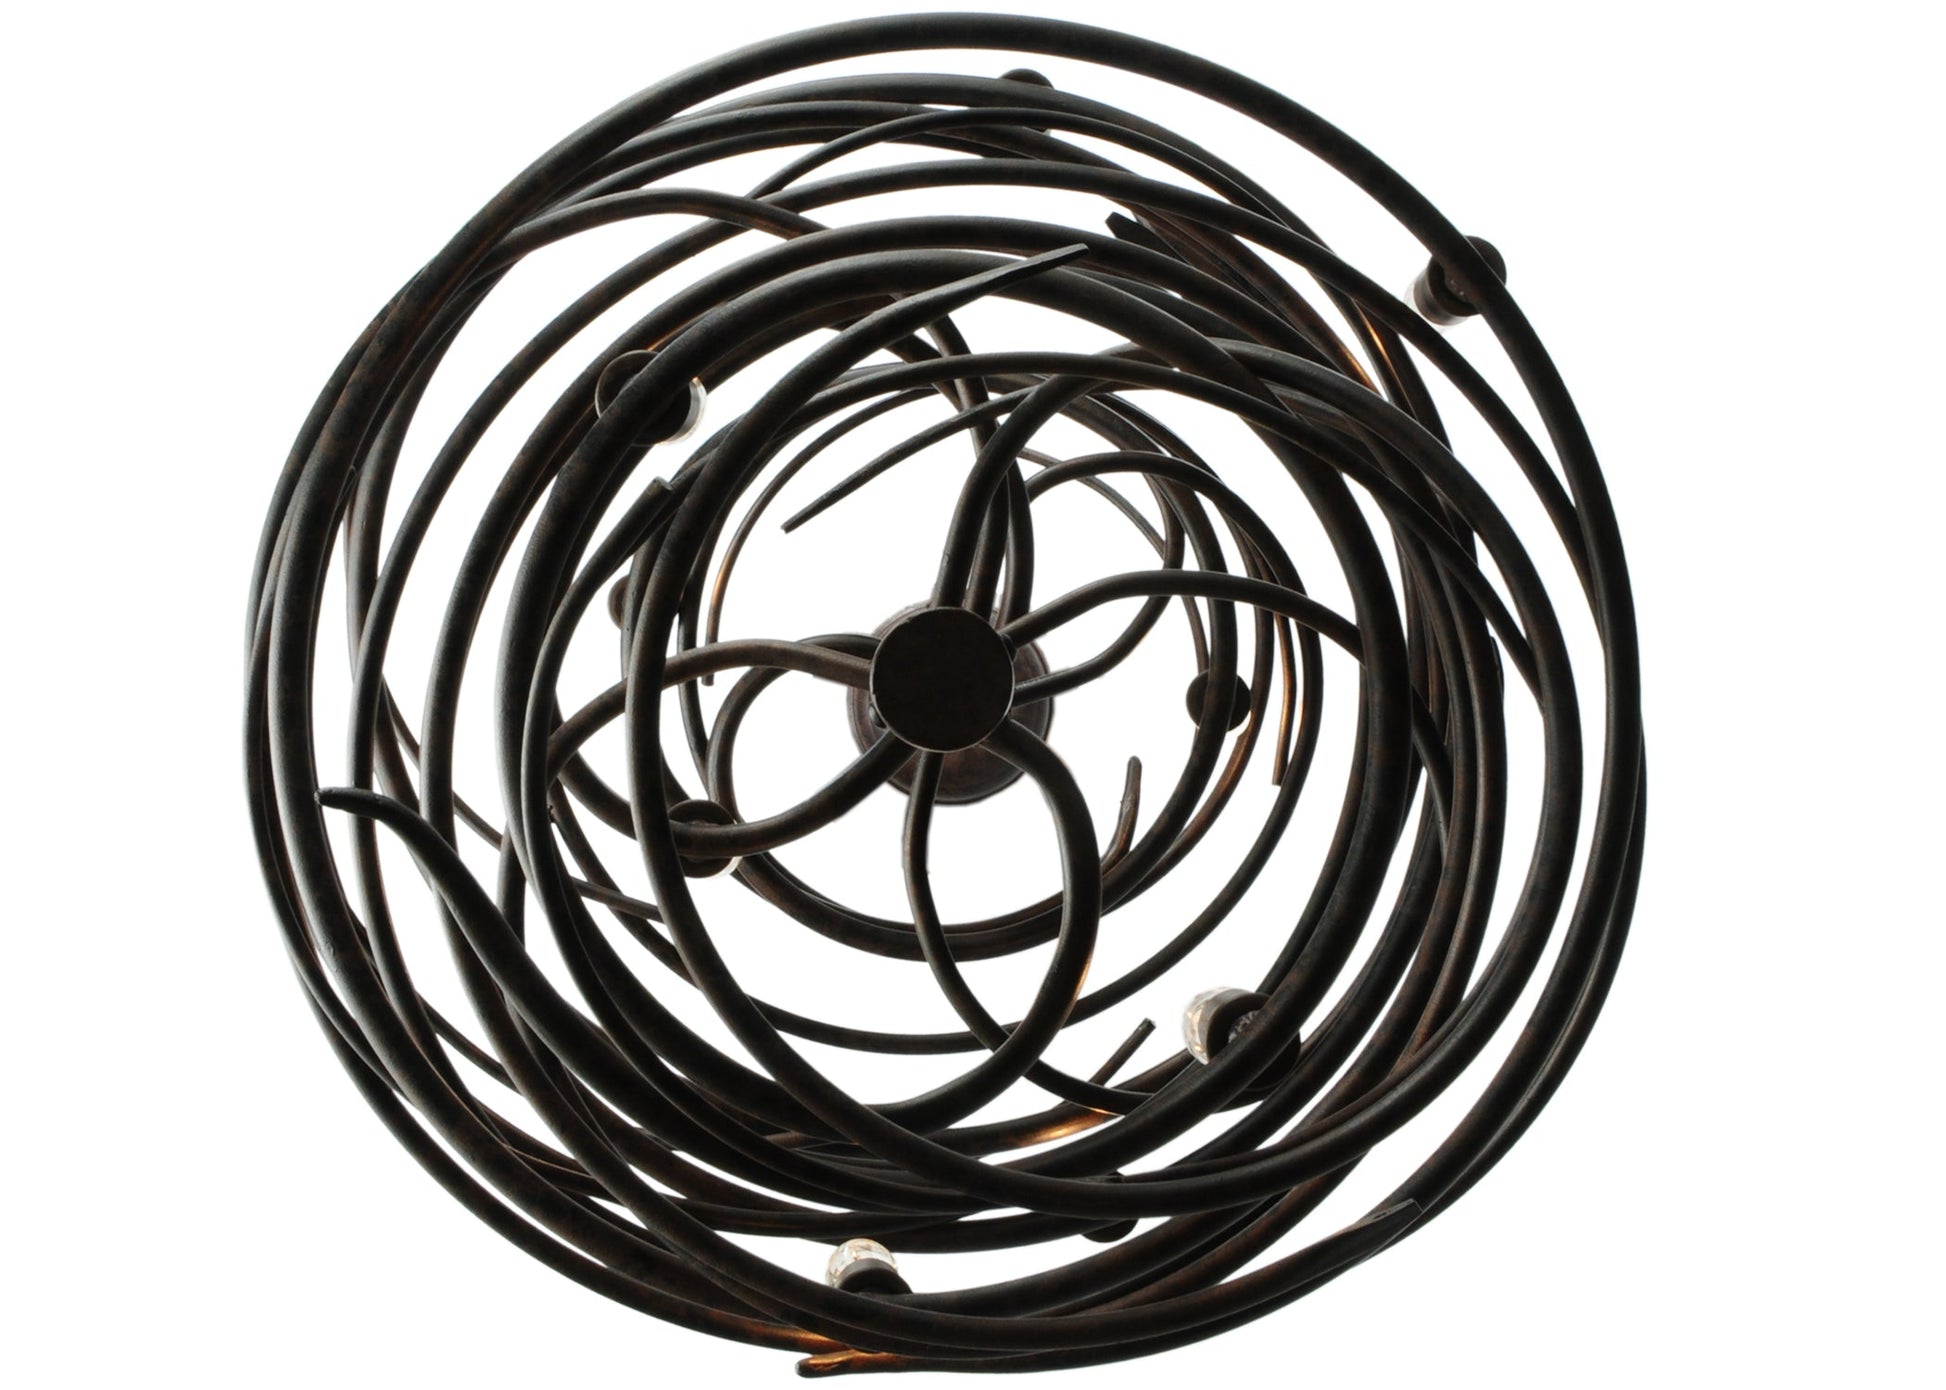 20.5" Cyclone 9-Light Chandelier by 2nd Ave Lighting